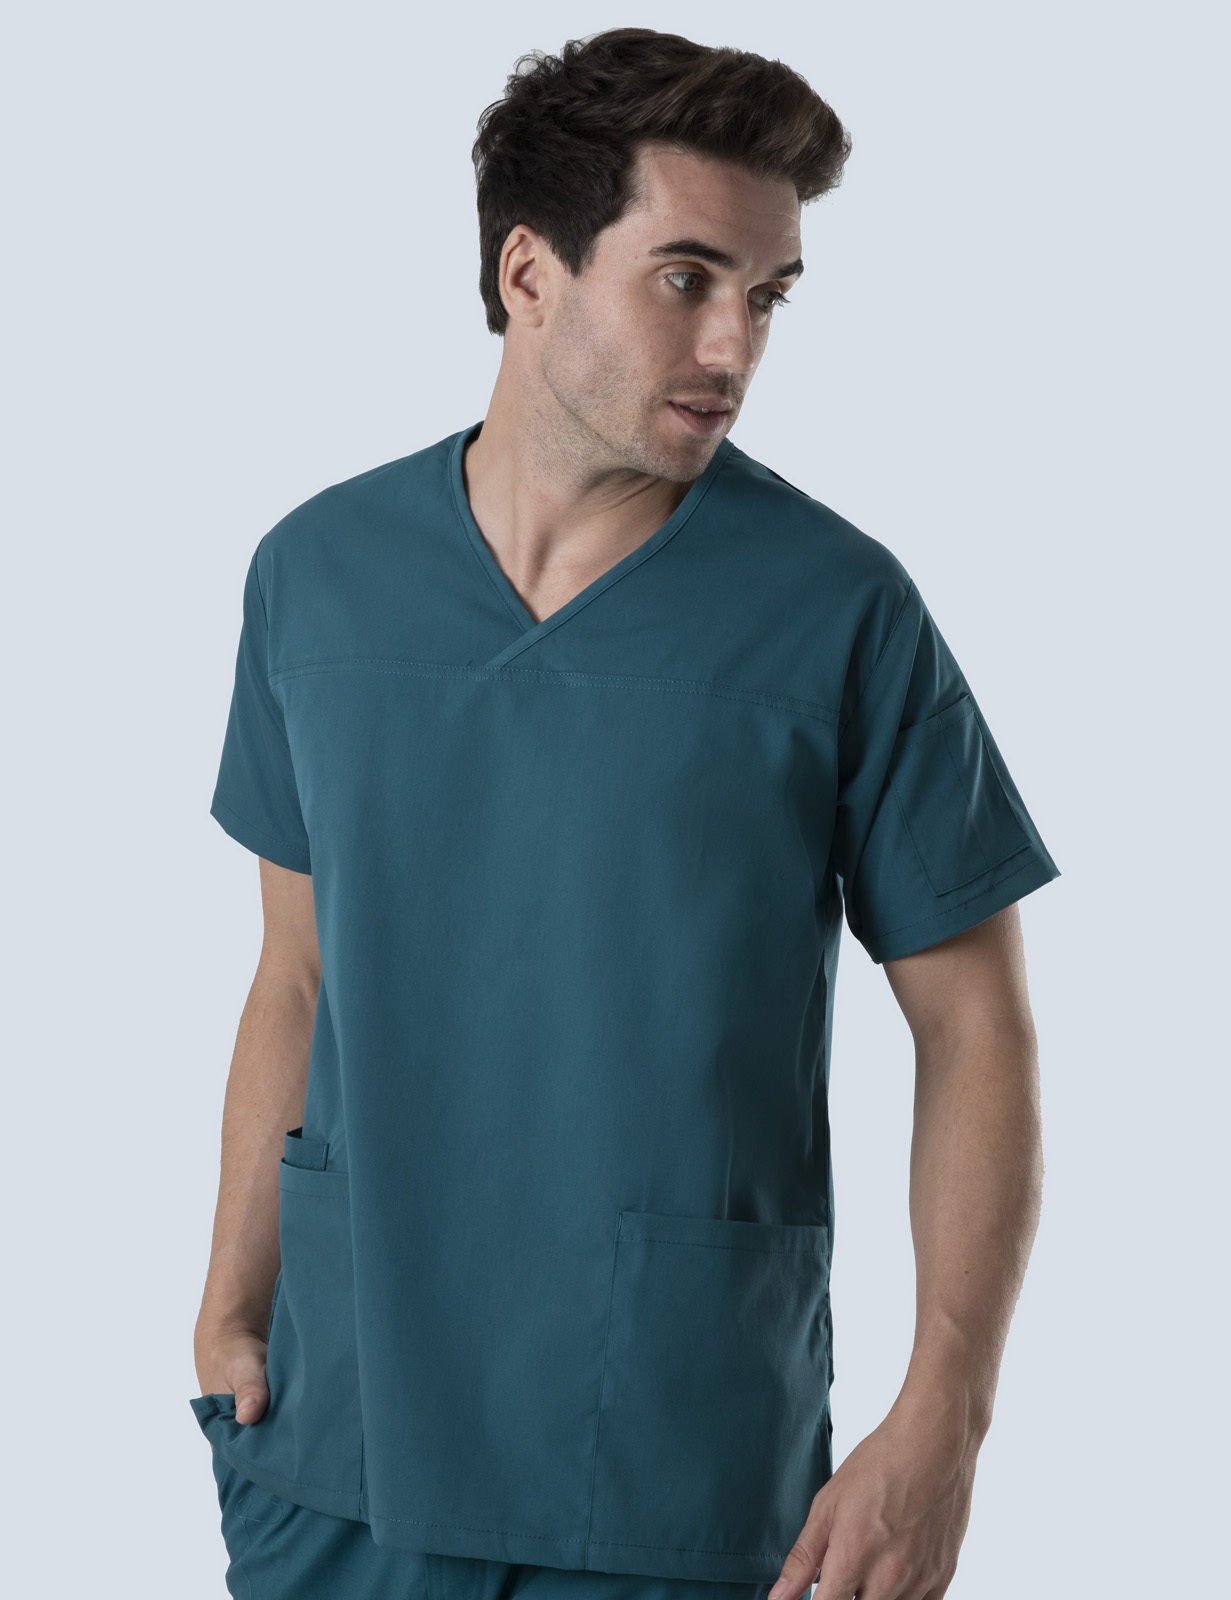 Men's Fit Solid Scrub Top - Caribbean - Large